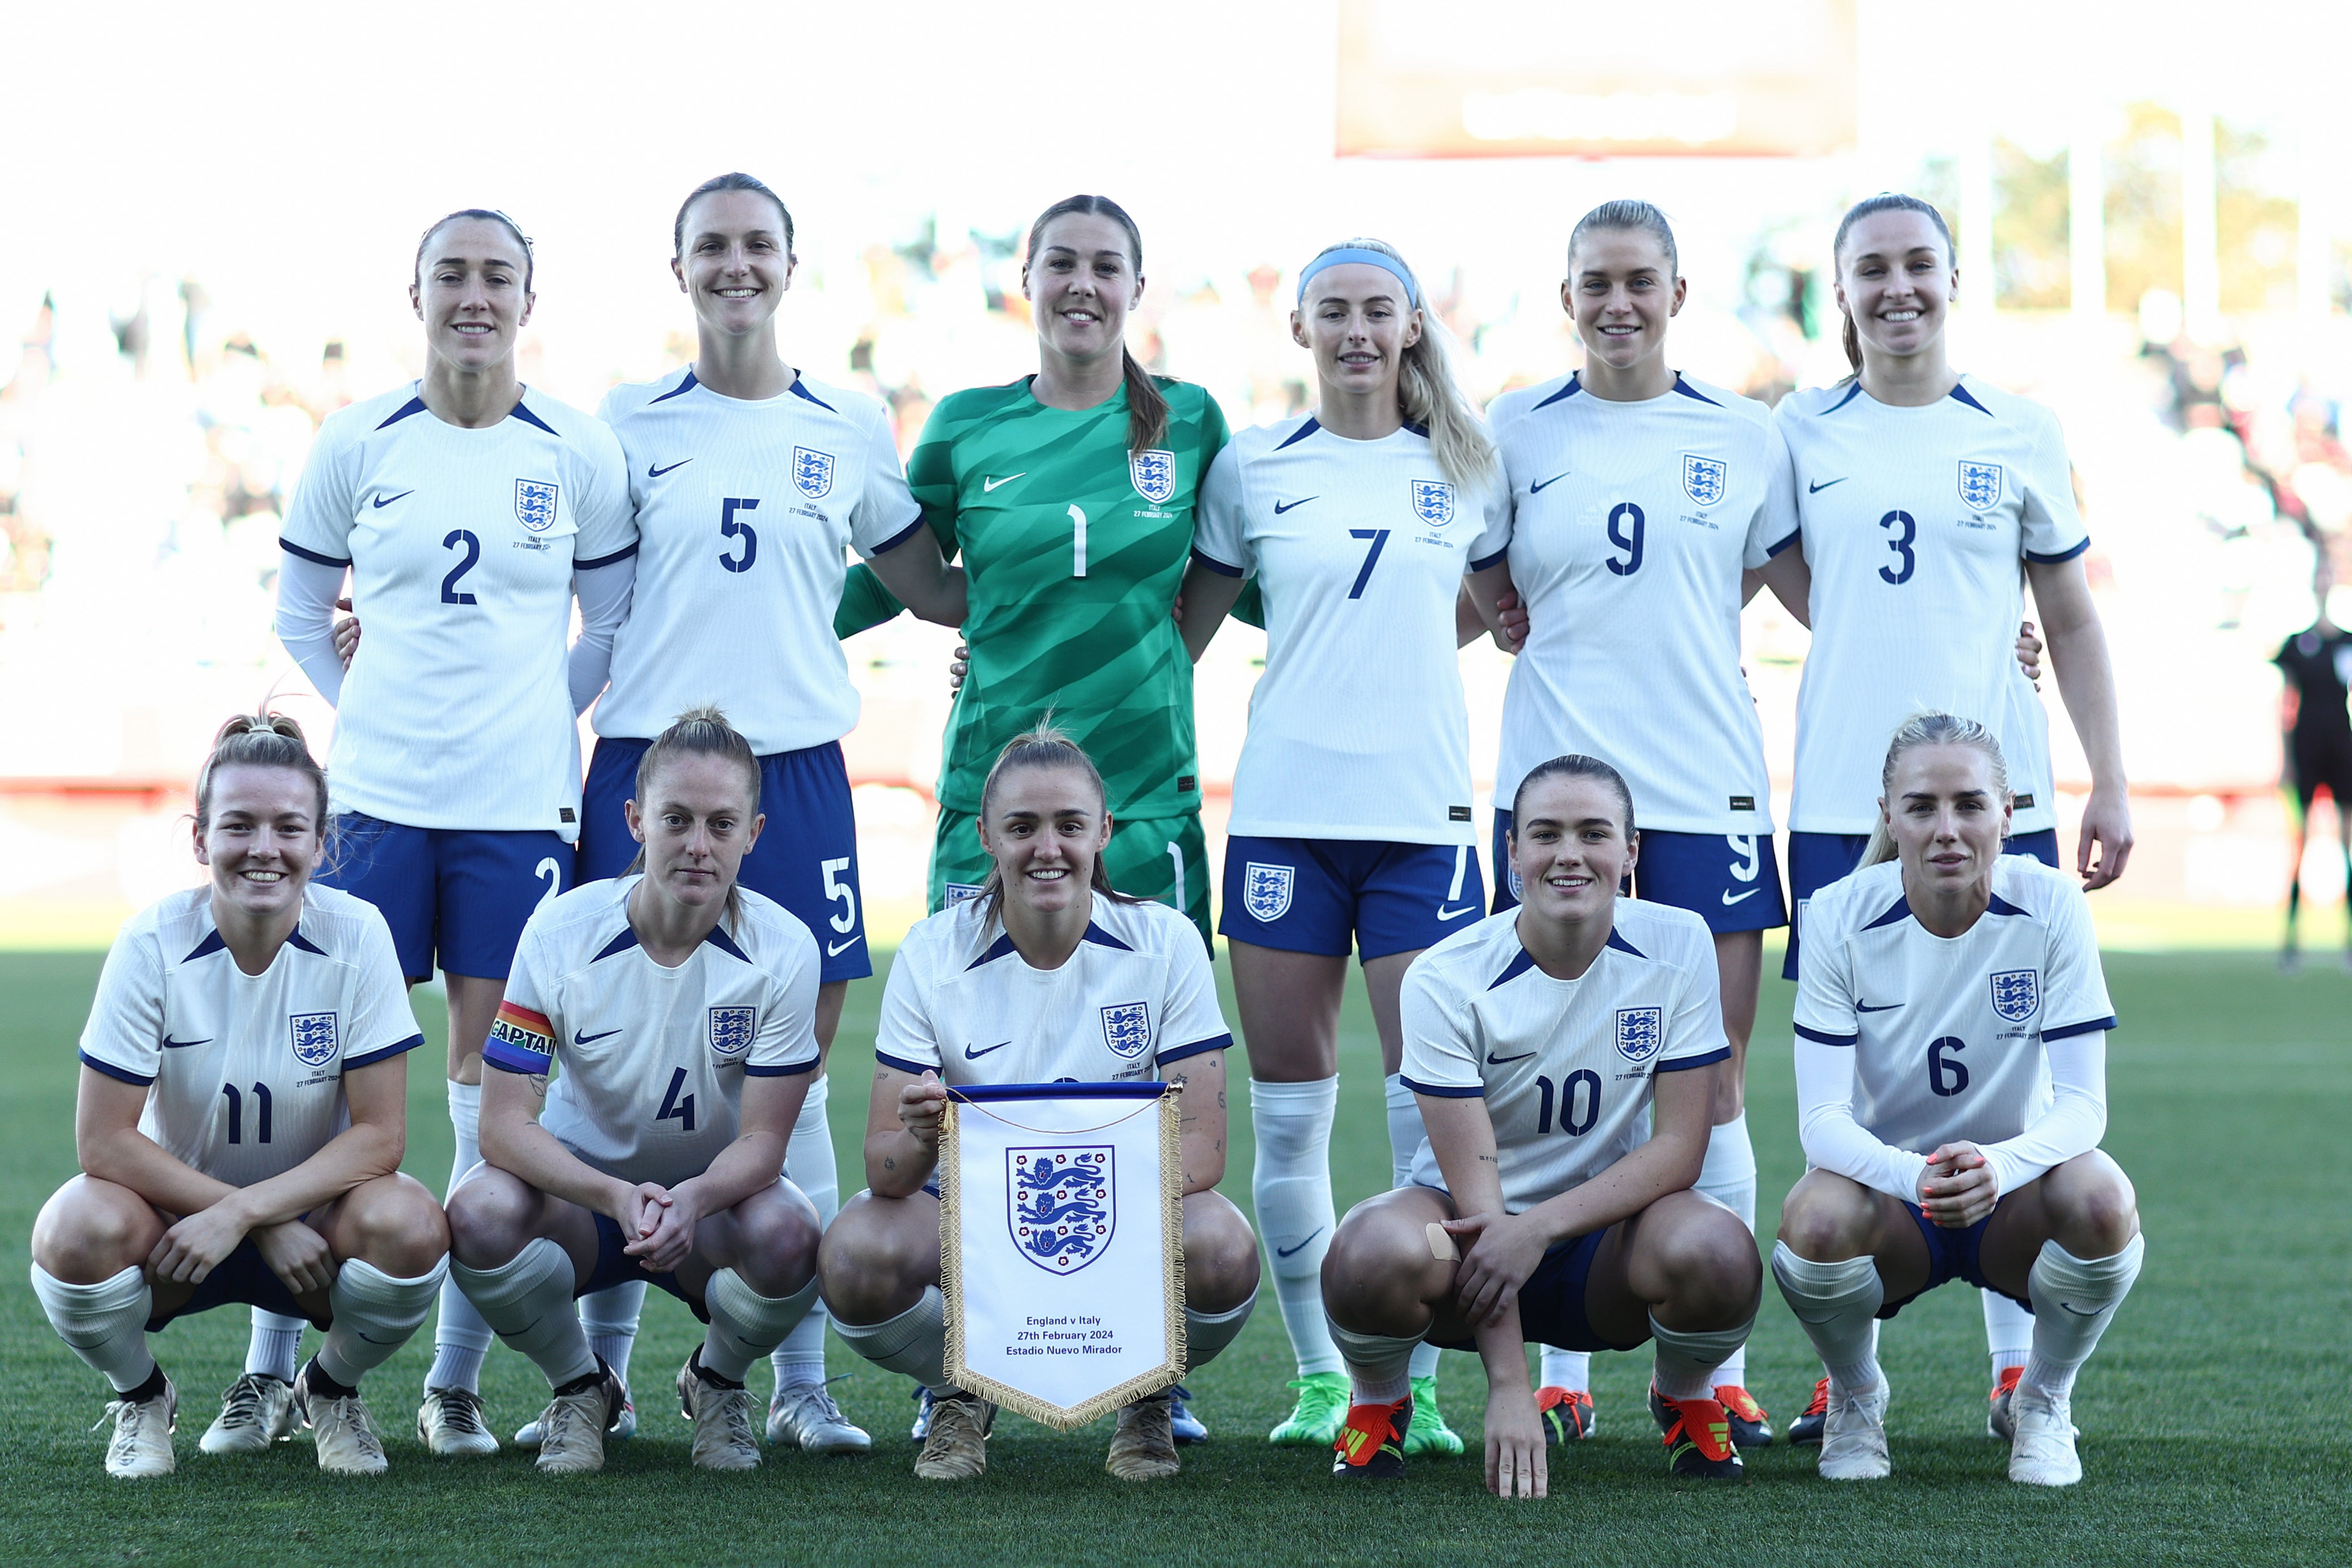 The Lionesses aren’t as representative as during her own playing career, claims Fara Williams